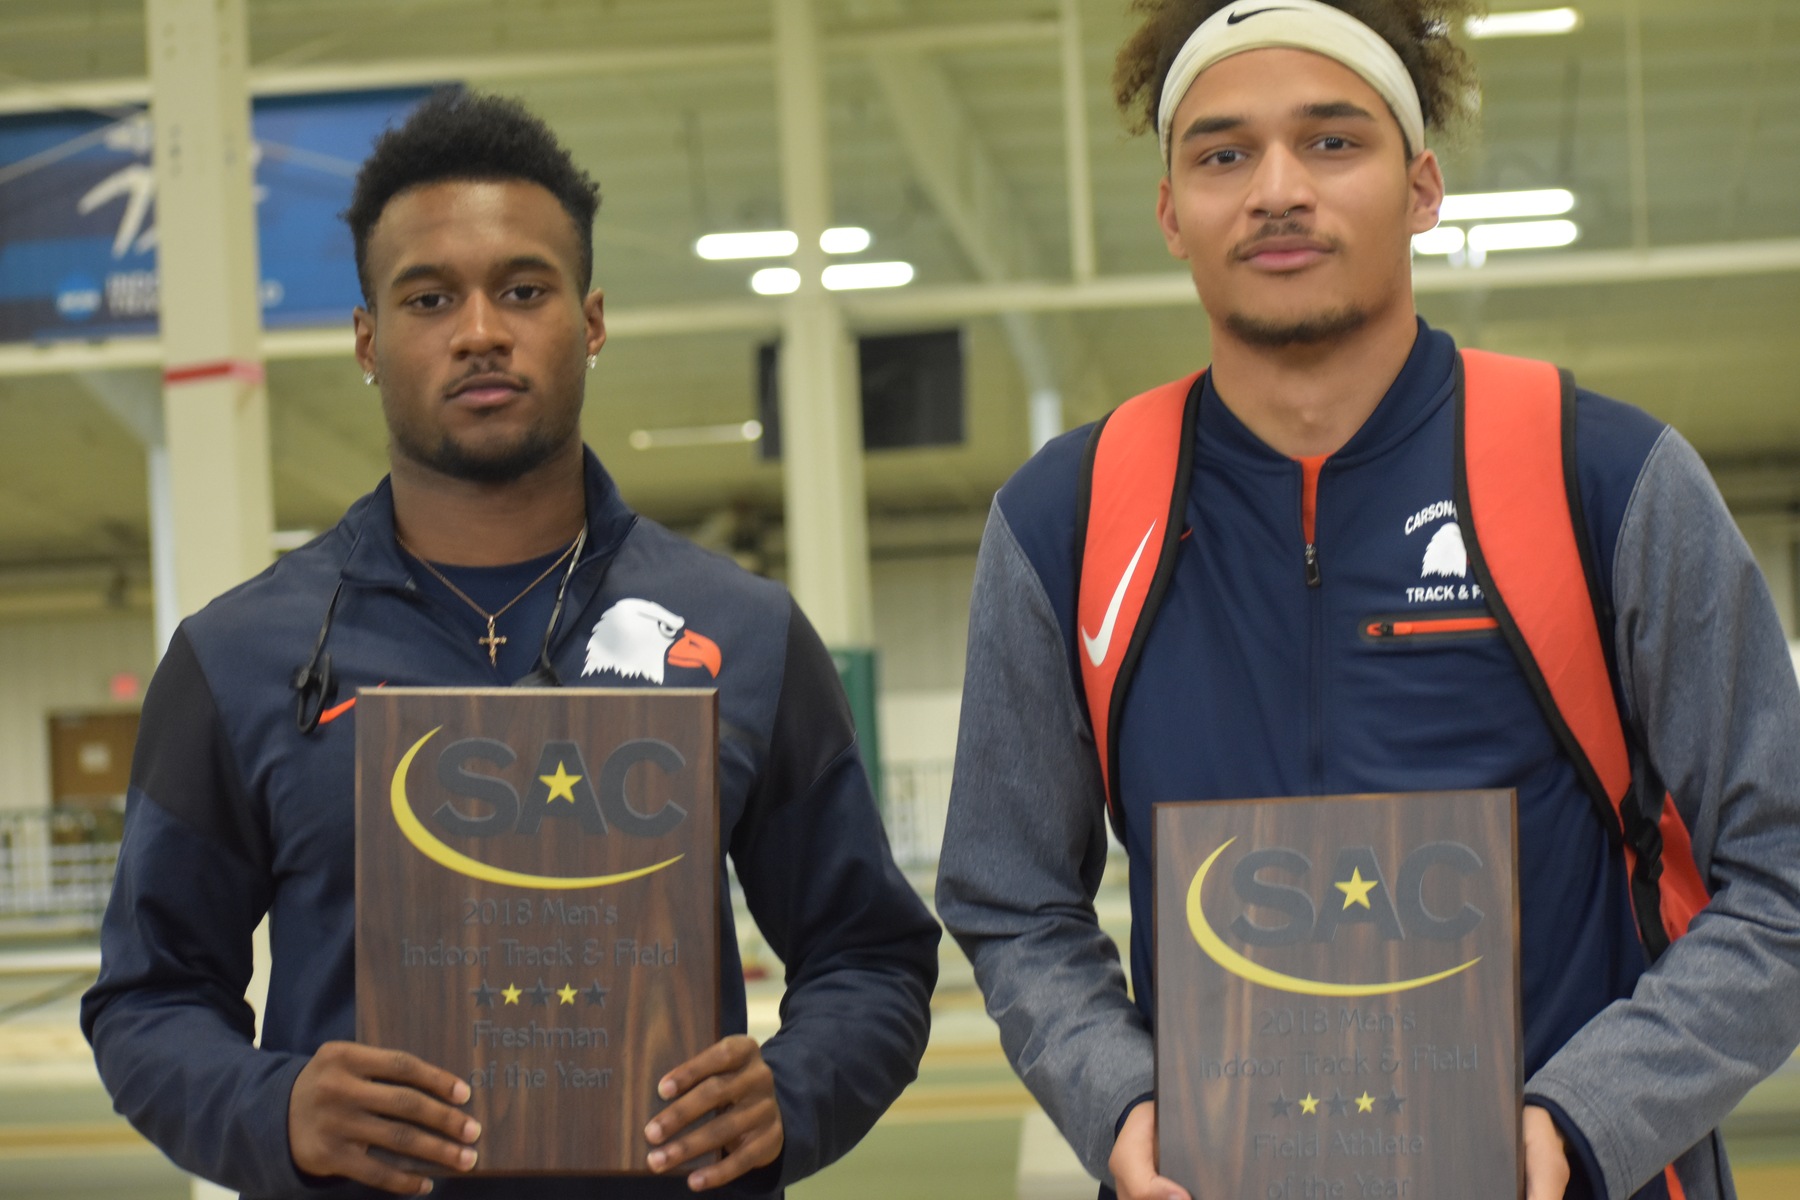 Moore and Potts-Howard bring home hardware following conference championships